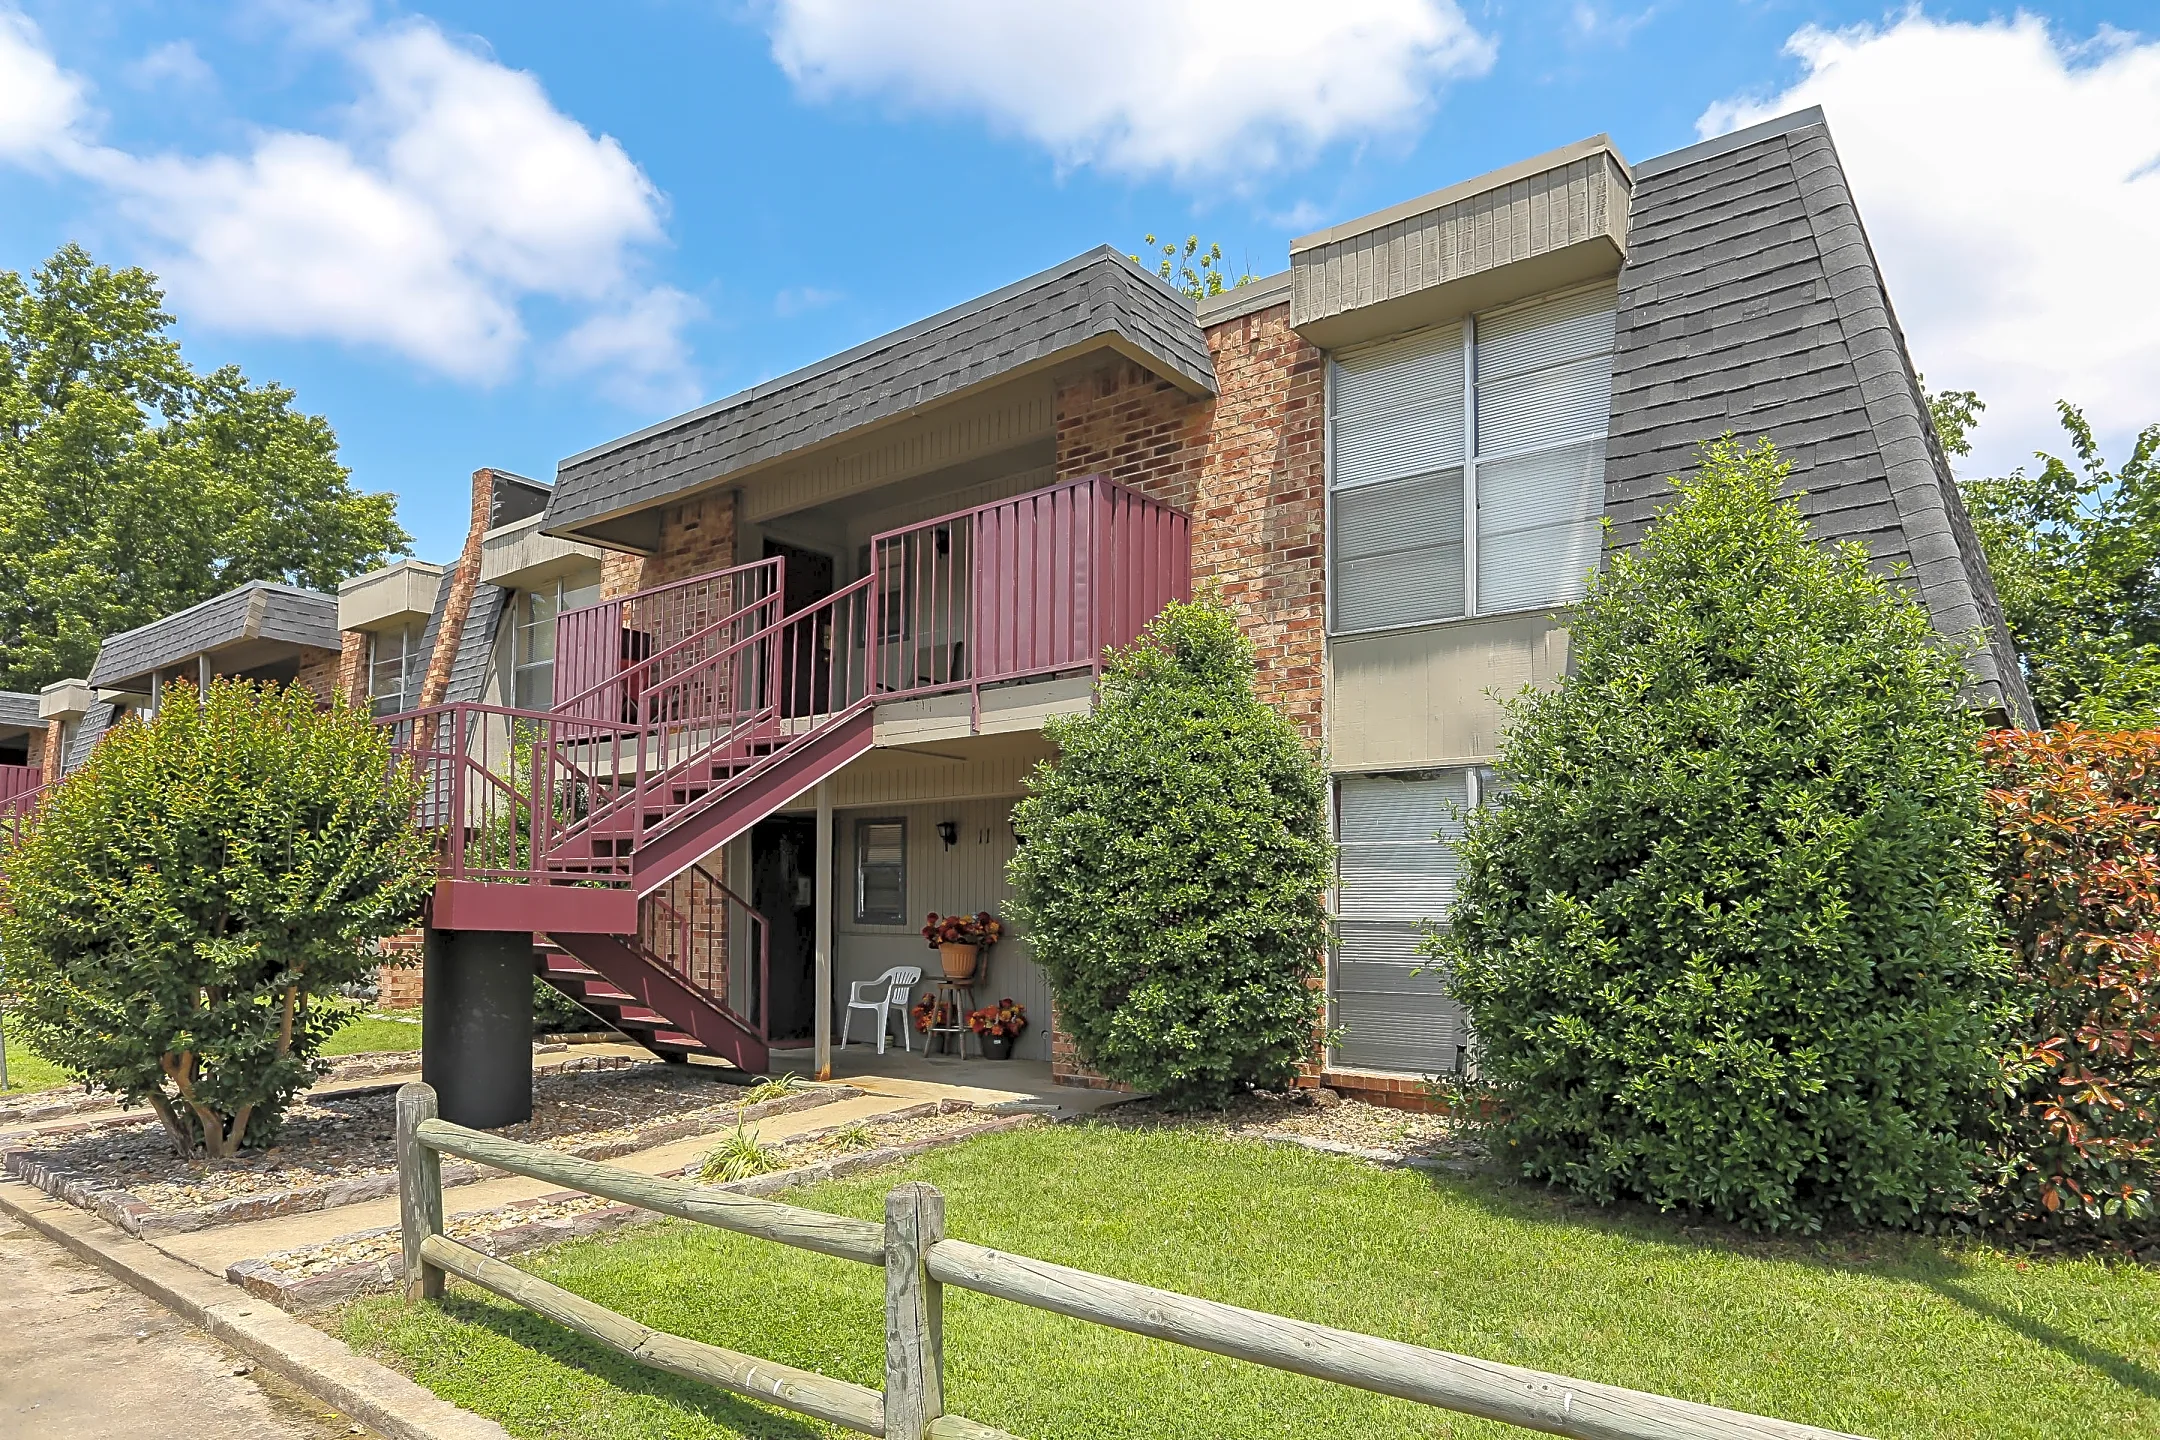 Building - Southbrooke Apartments - Fort Smith, AR